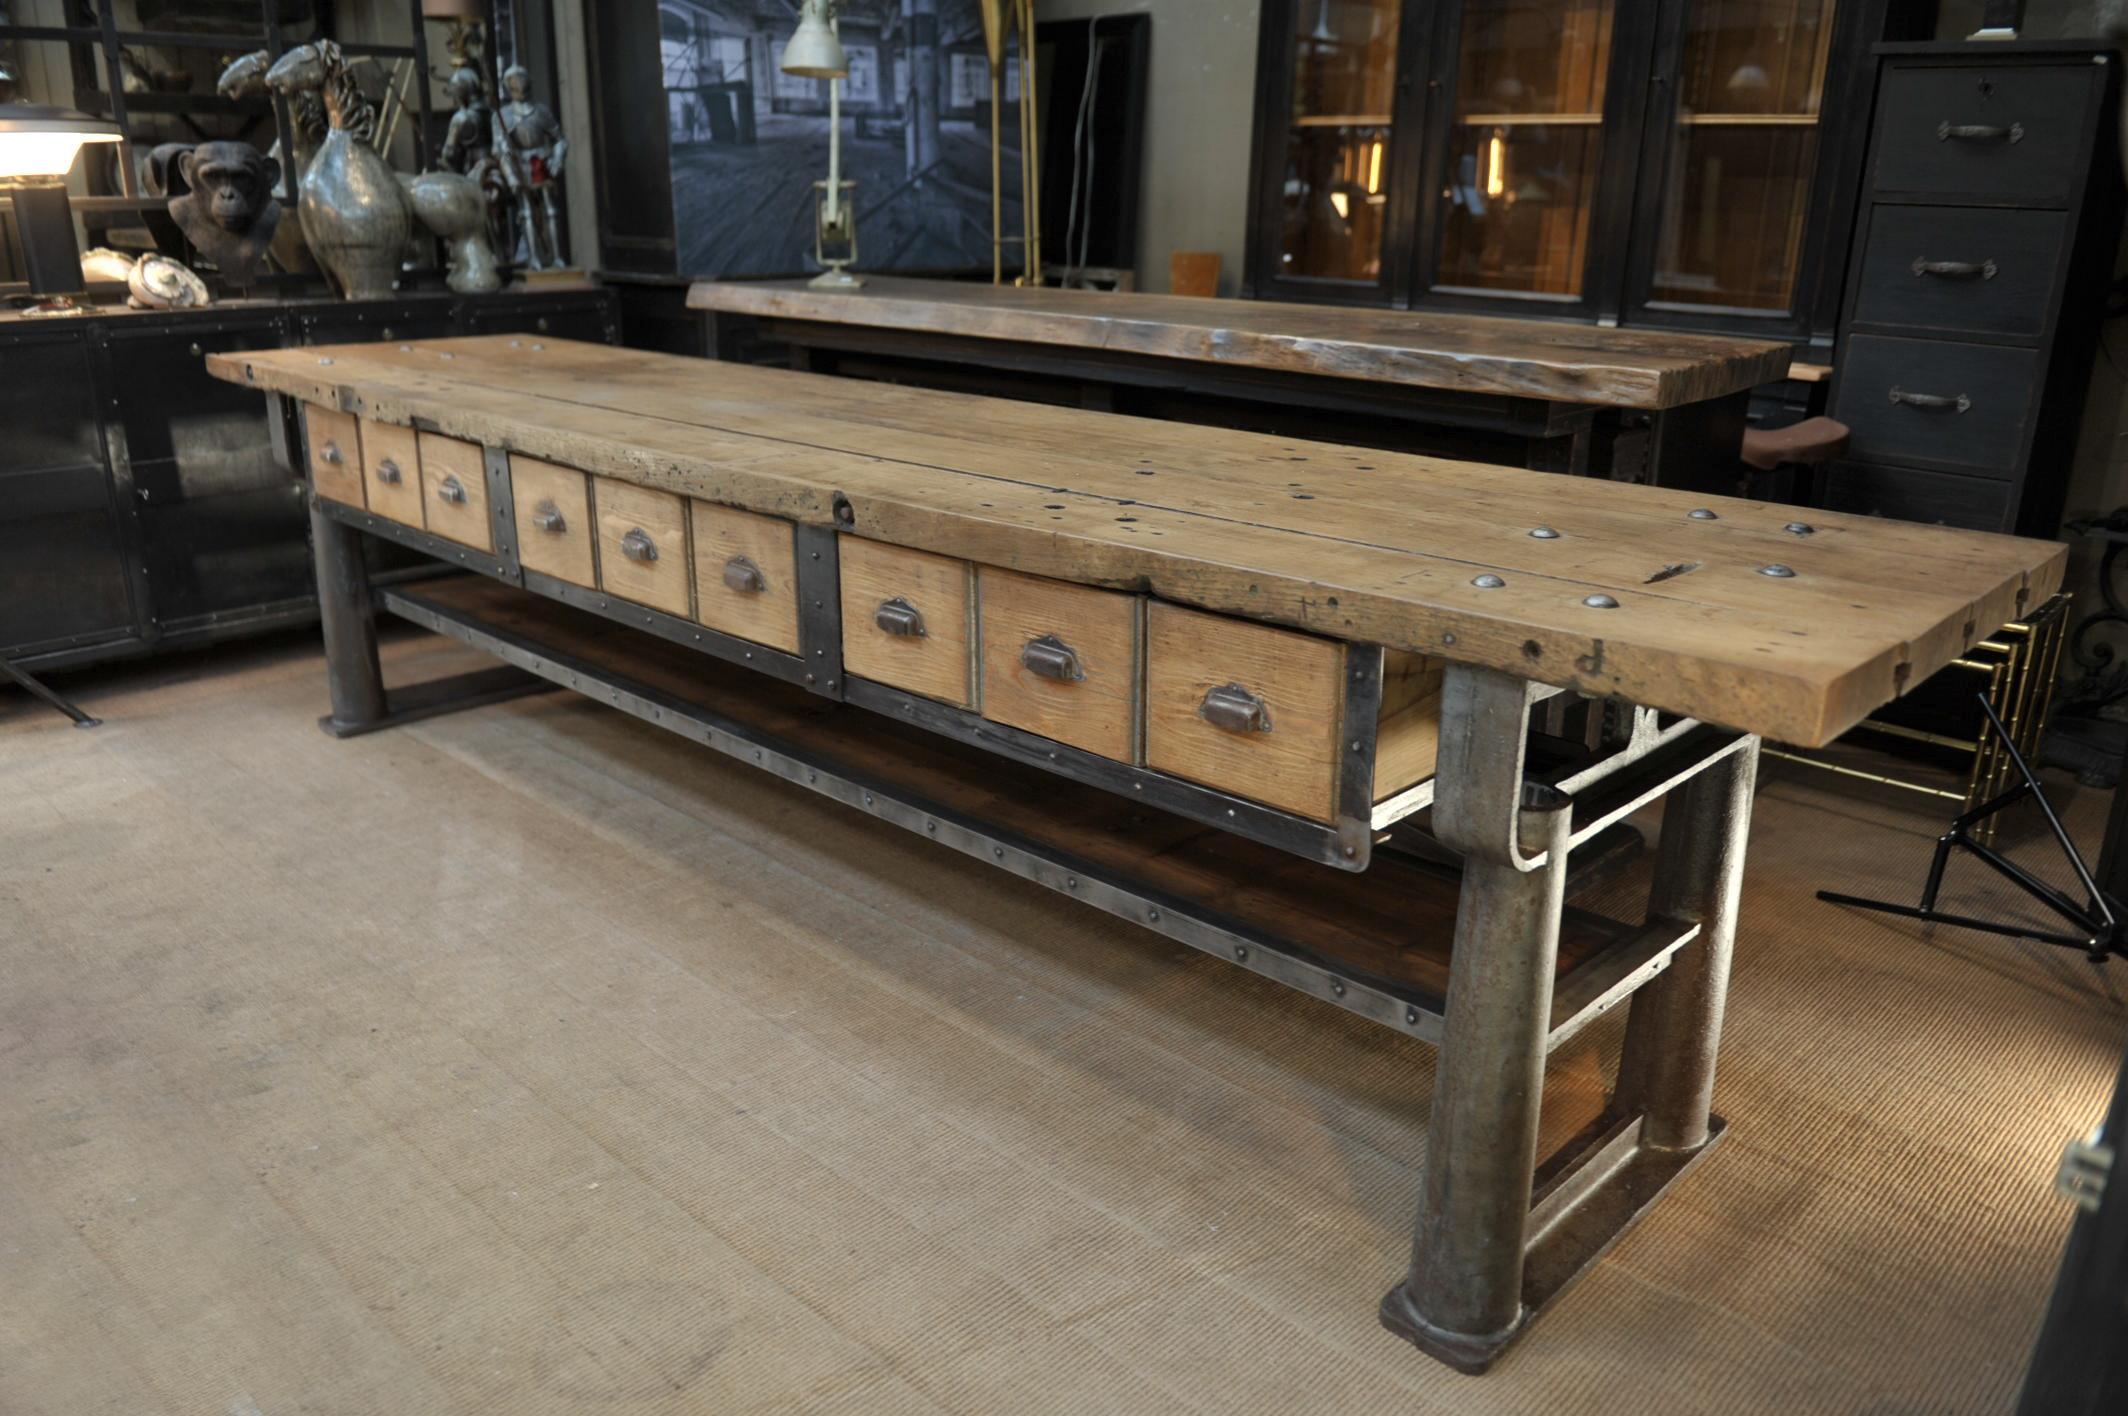 Very rare all original large console or center work table in cast iron structure, original solid oak top, one lower shelve and 9 drawers in pine wood. From French Factory, circa 1900. Sand and wax finish.
  